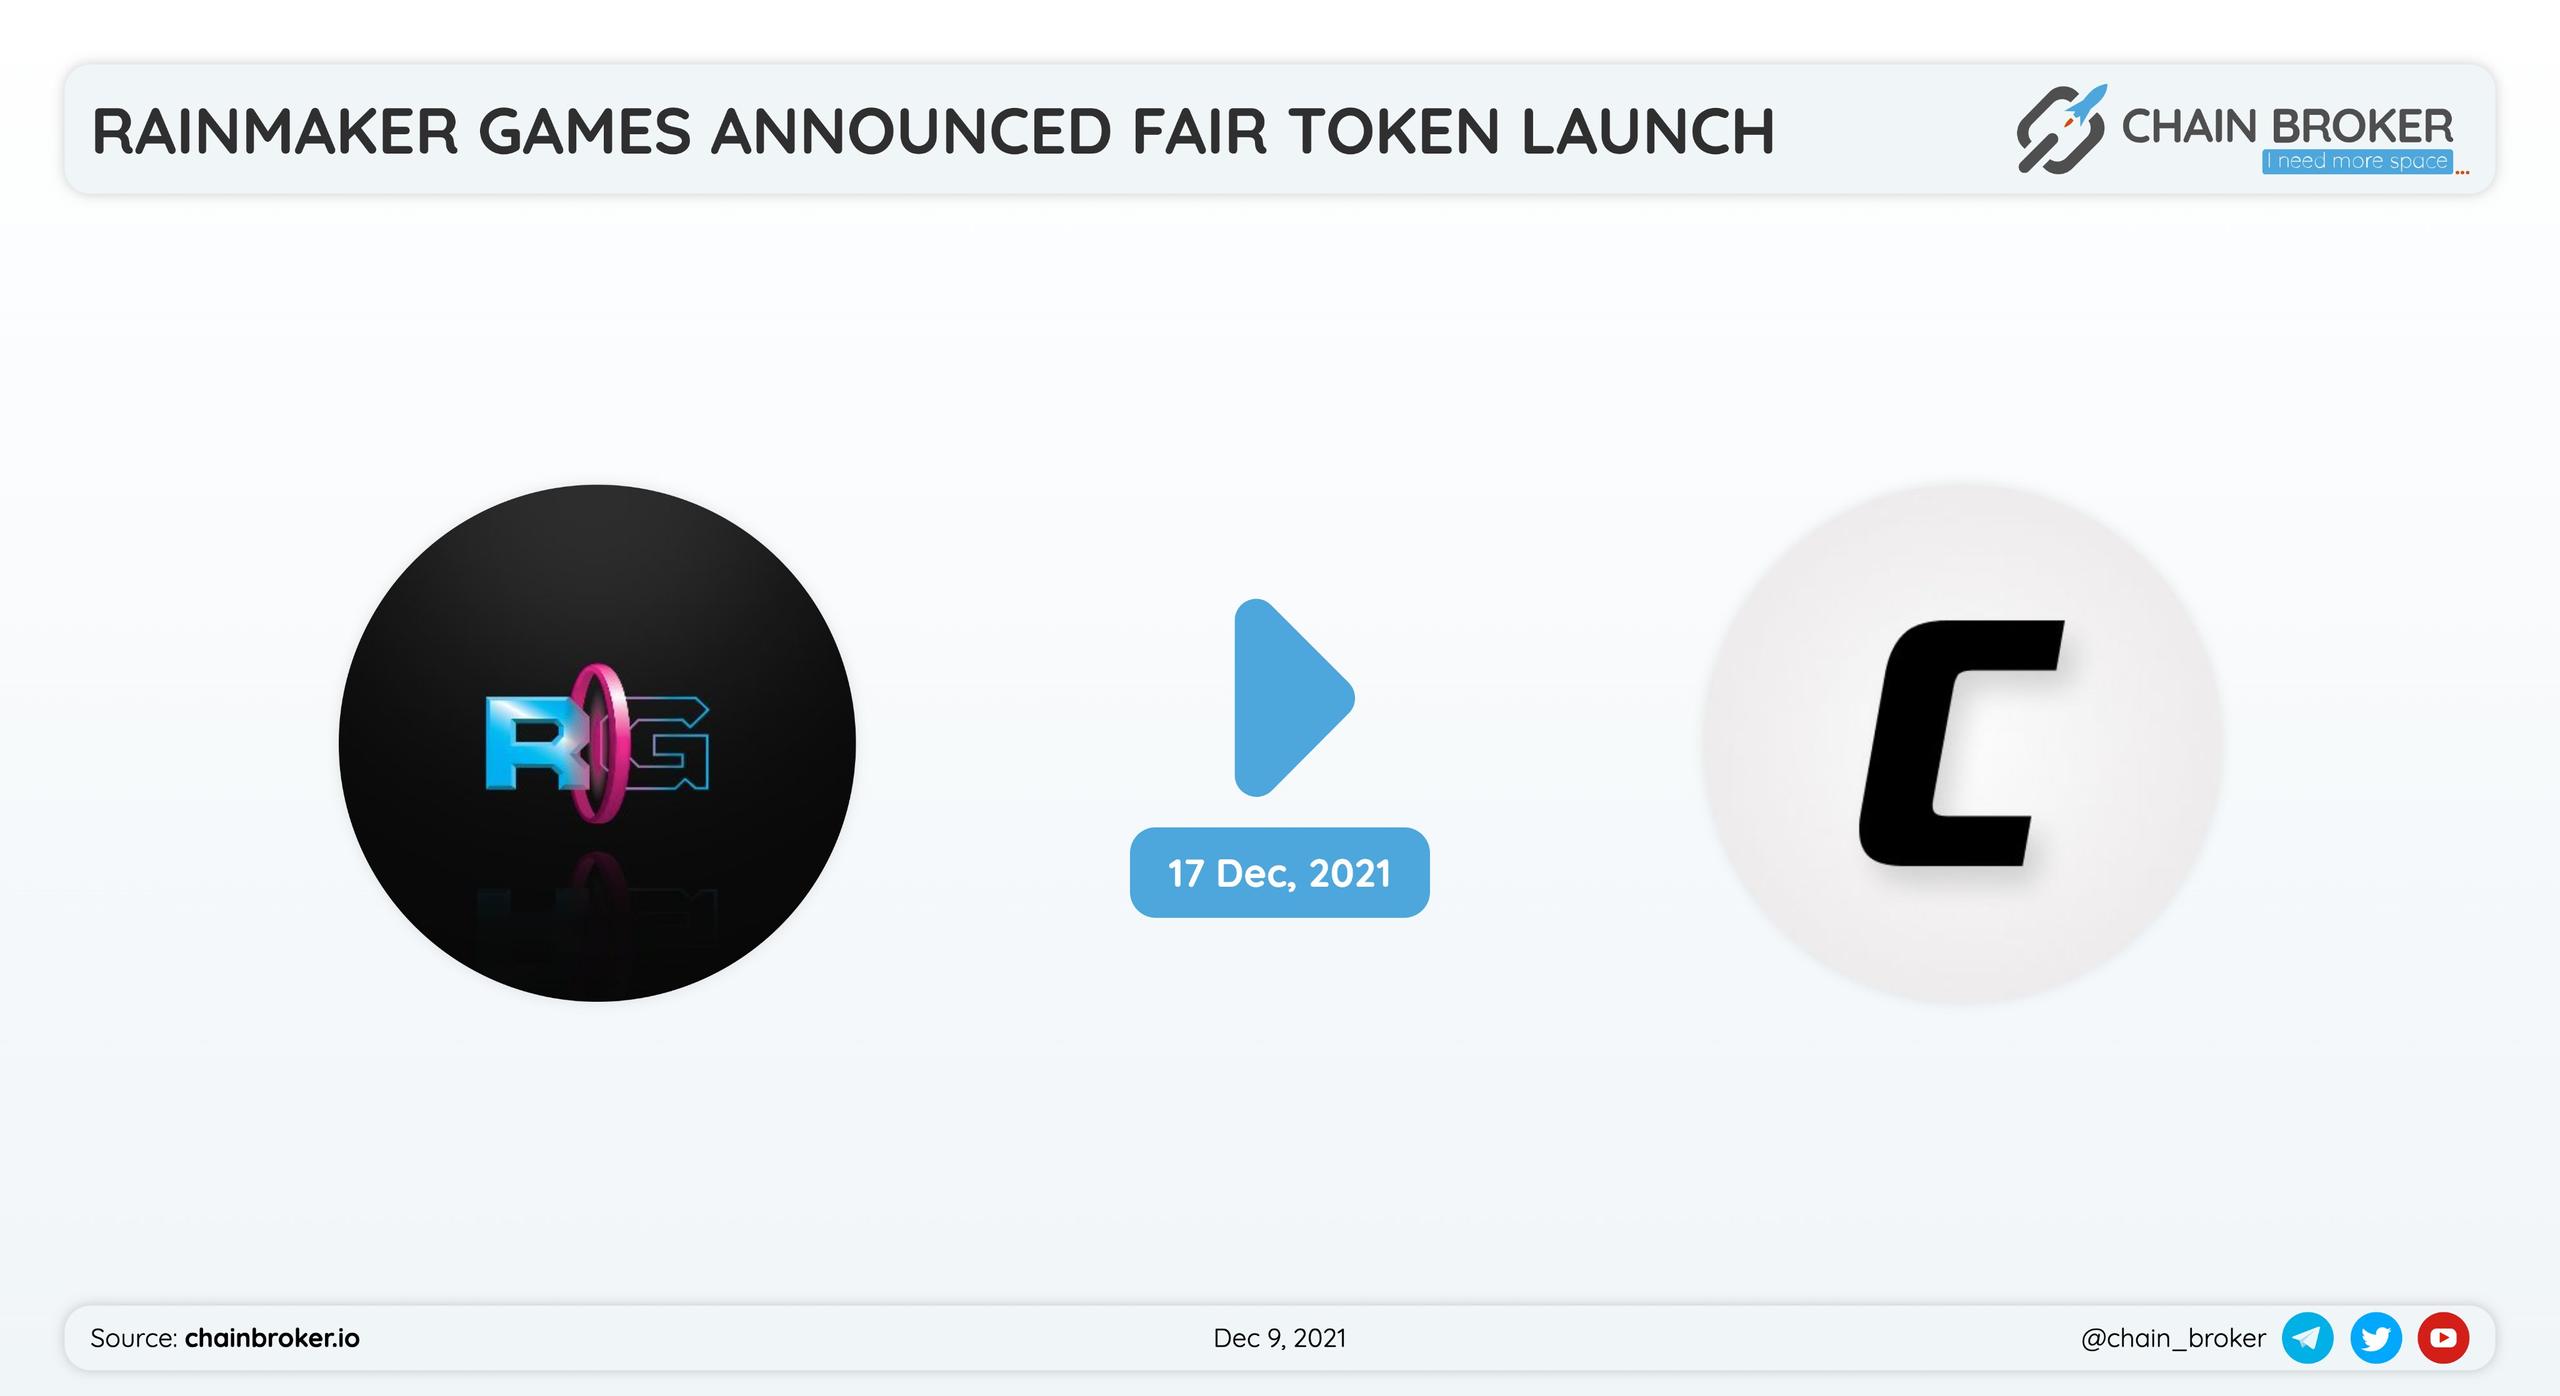 Rainmaker Gaming has partnered with Copper Launch for token fair launch.